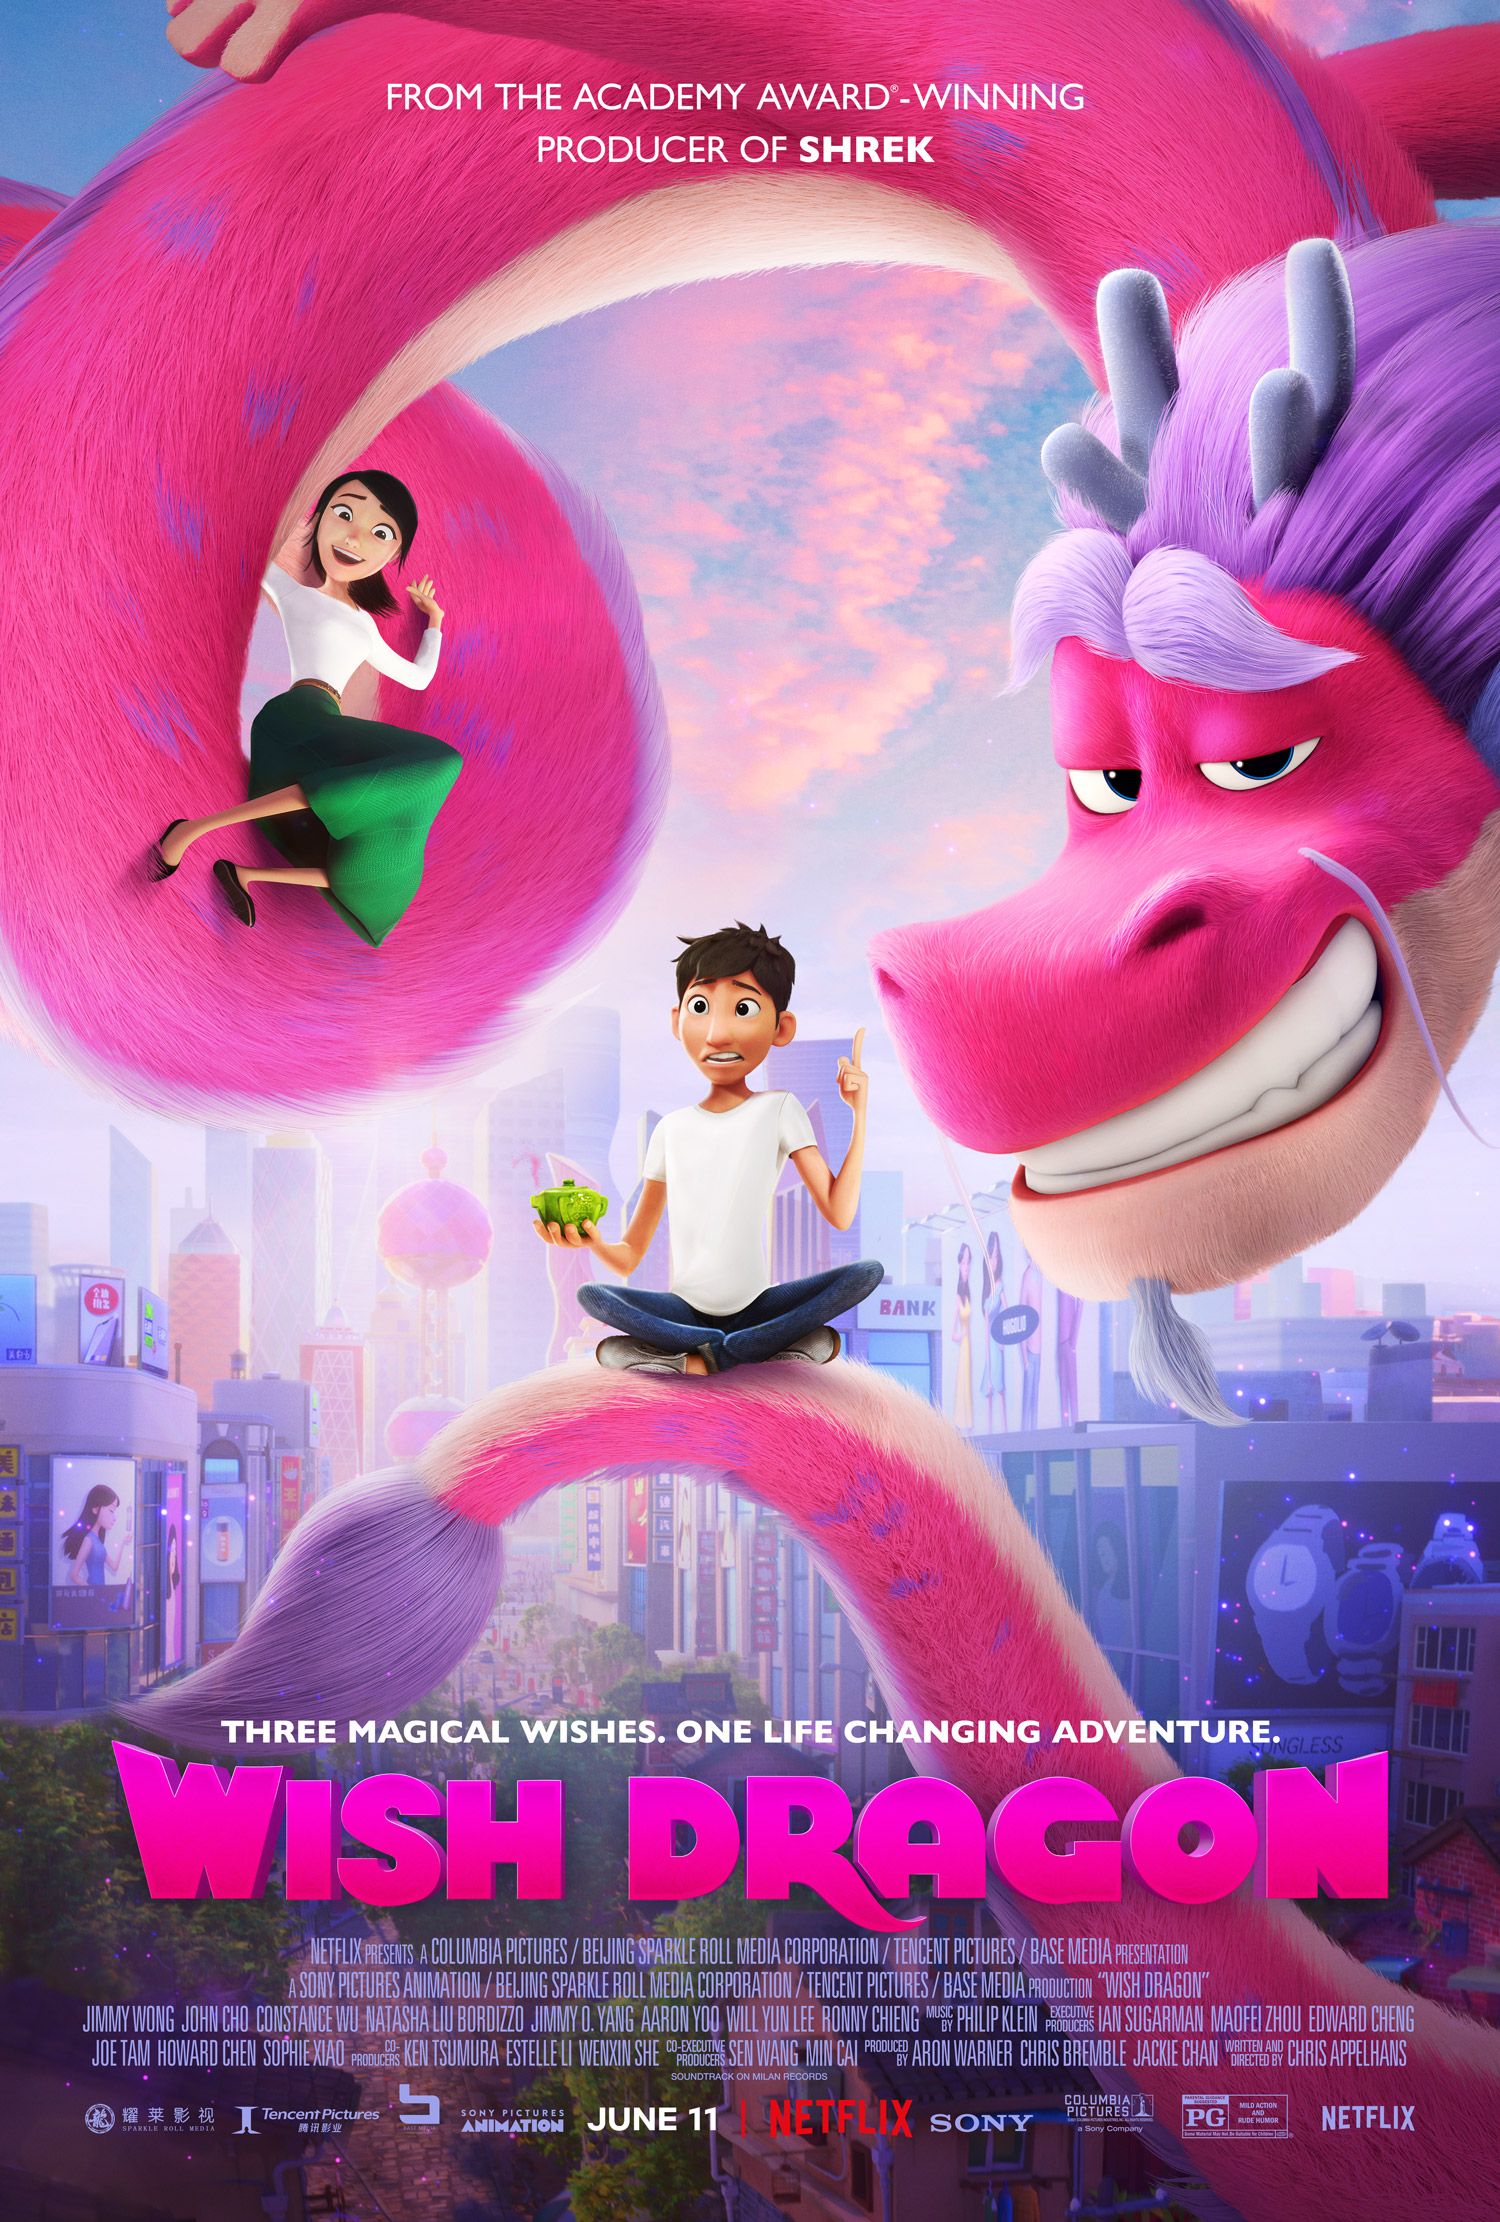 Netflix released its Wish Dragon poster